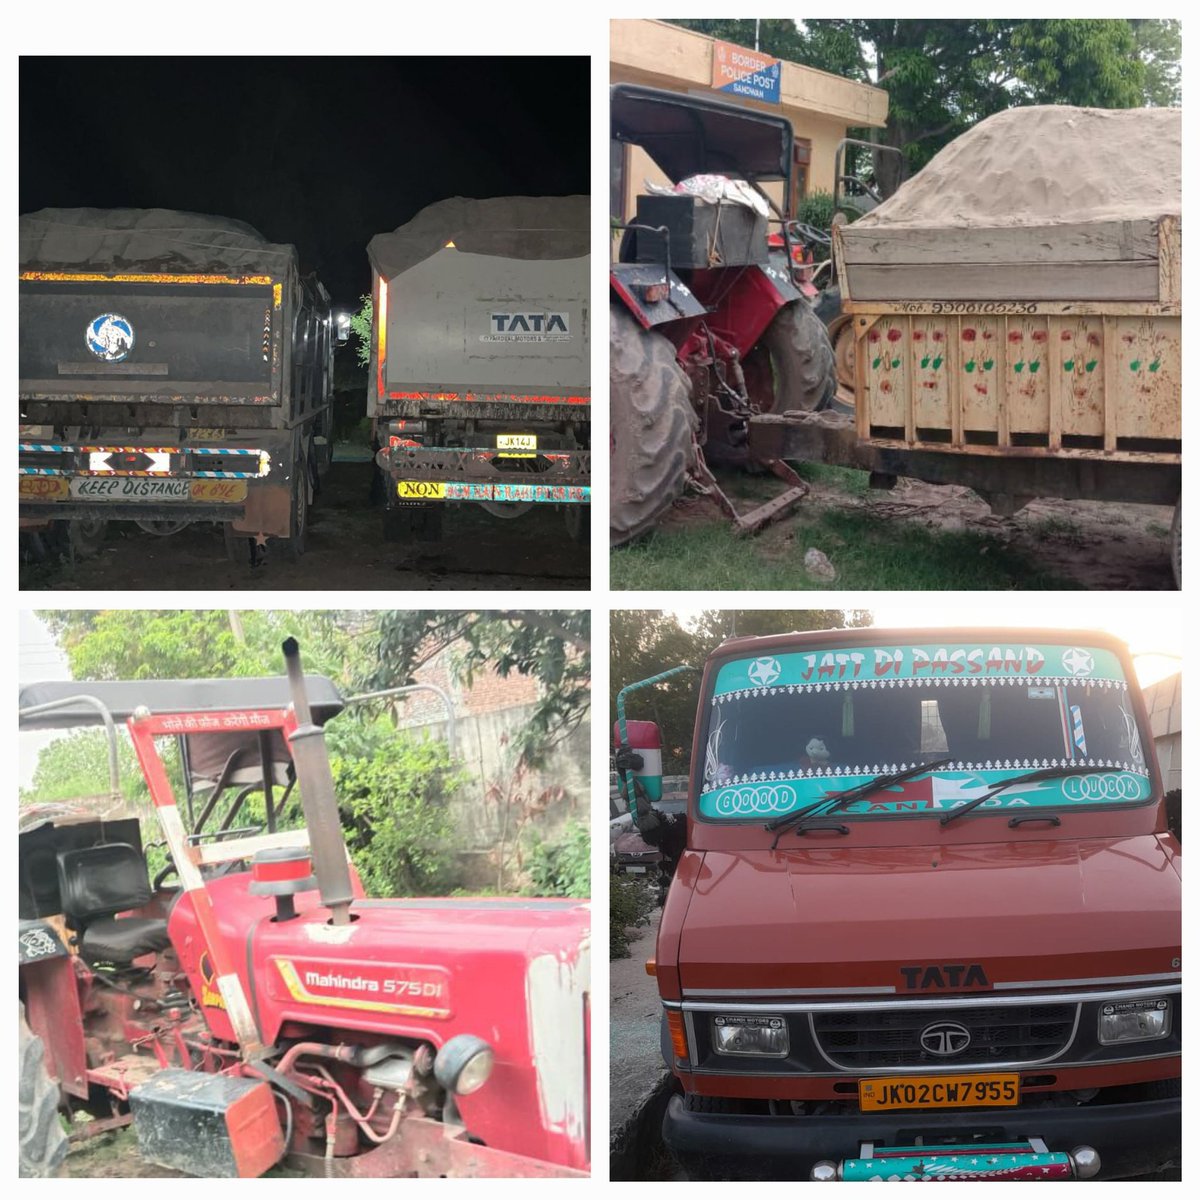 CRACKDOWN ON ILLEGAL MINING,05 VEHICLES SEIZED BY JKP IN RURAL ZONE OF DISTRICT JAMMU @JmuKmrPolice